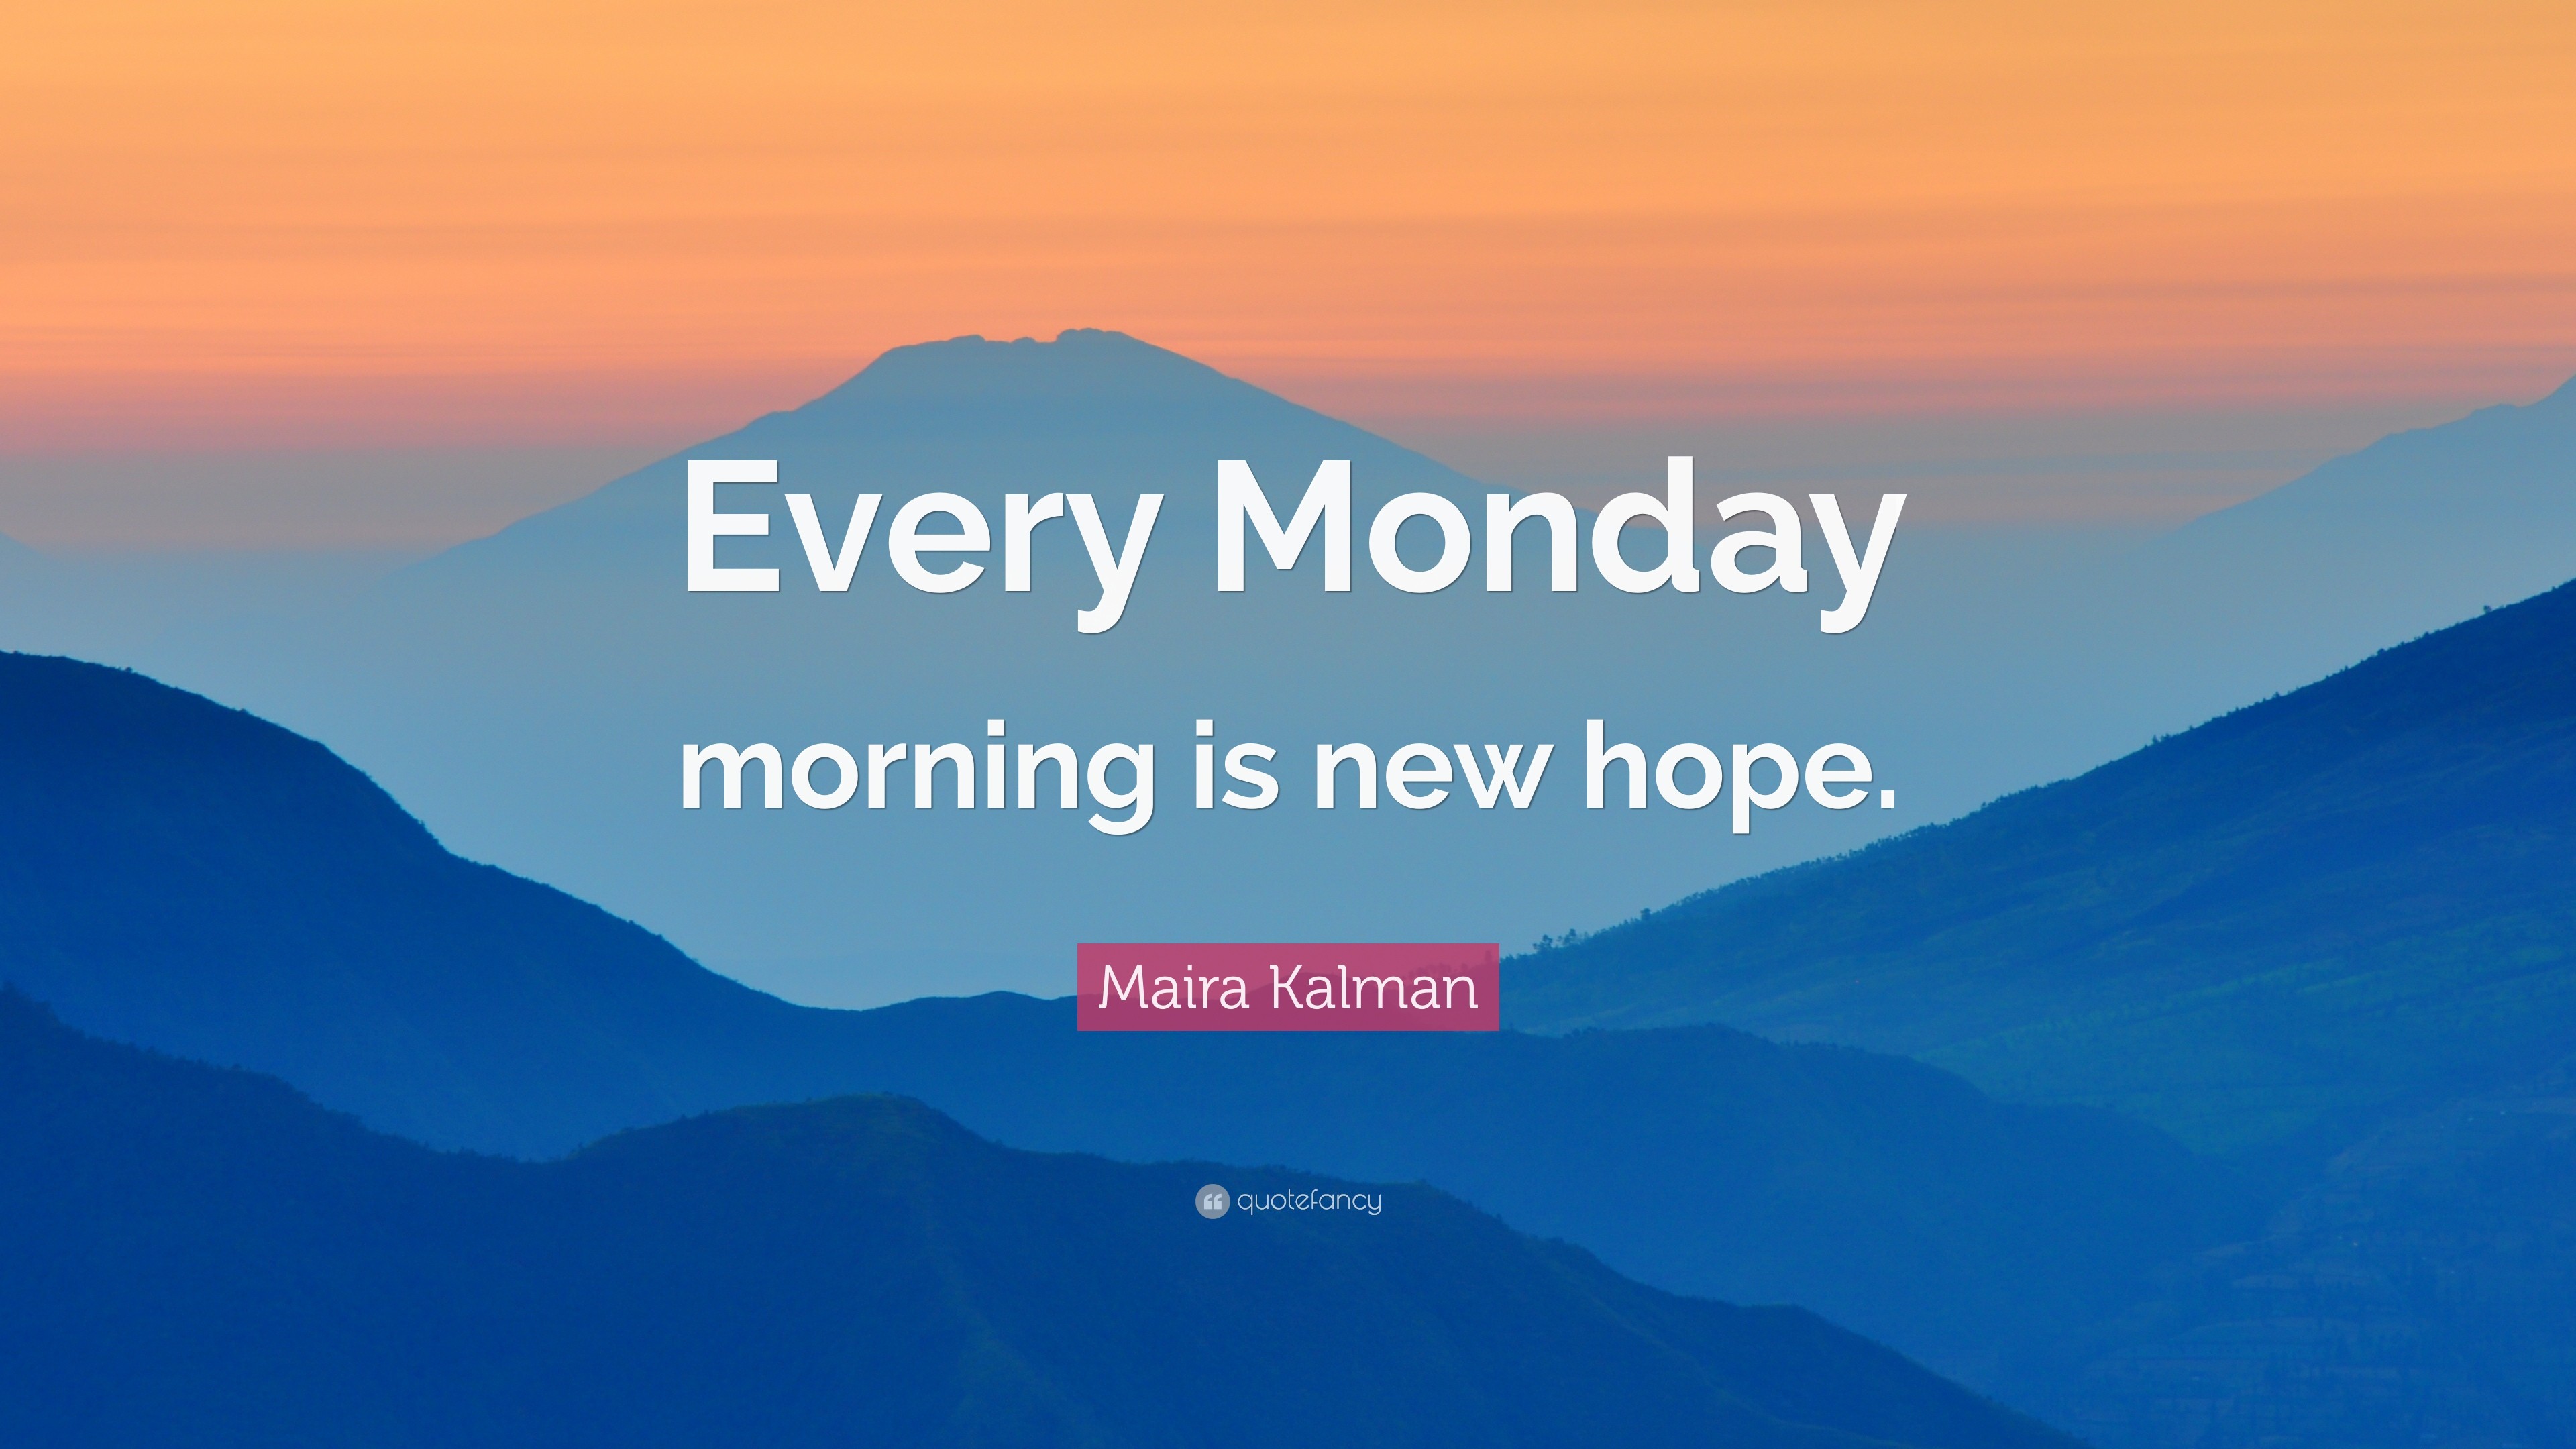 3840x2160 Monday Quotes: “Every Monday morning is new hope.” — Maira Kalman